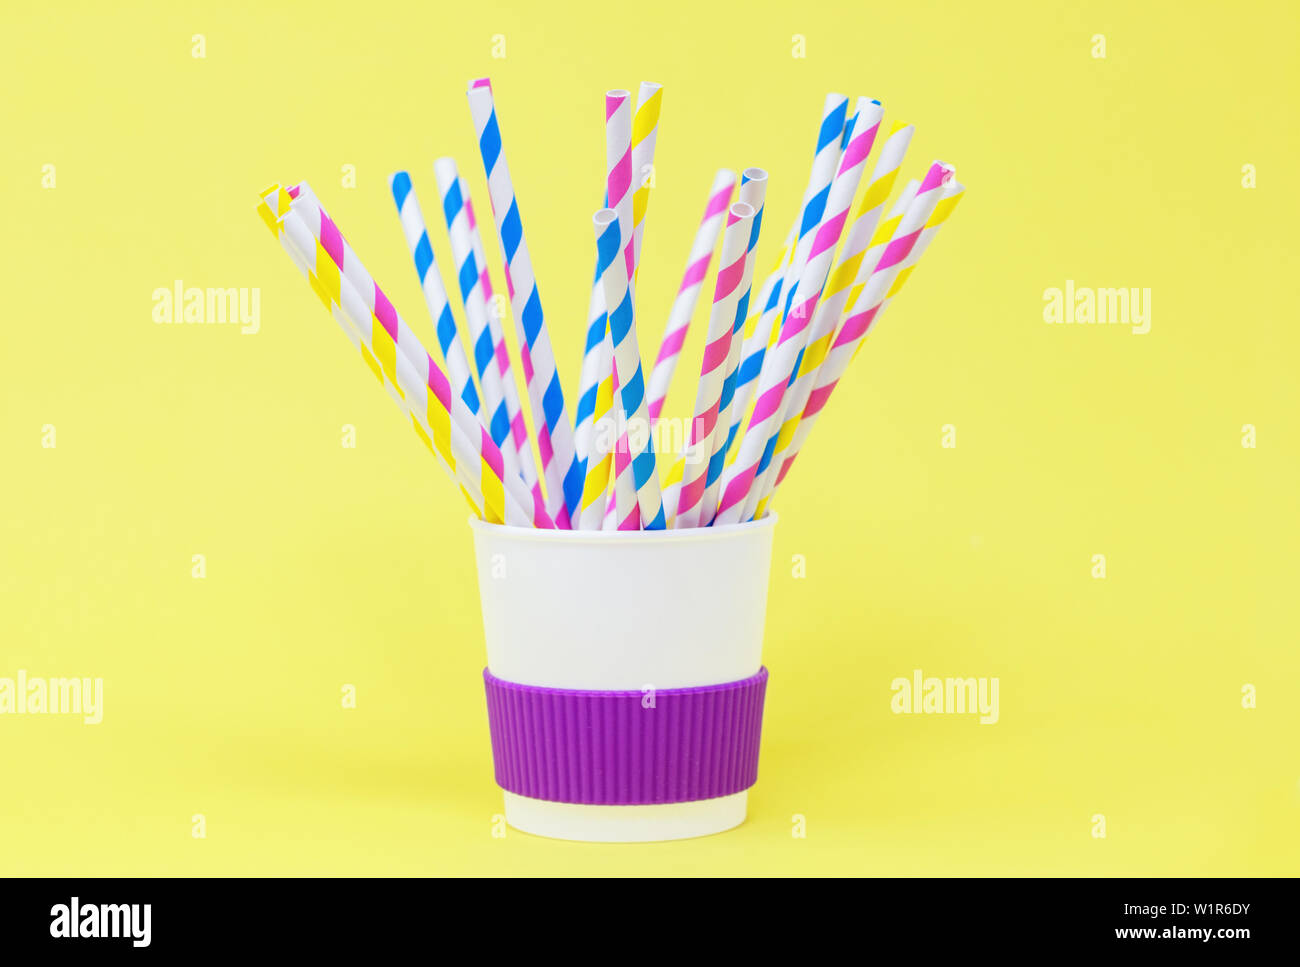 Paper straws in a reusable cup, against a yellow background Stock Photo